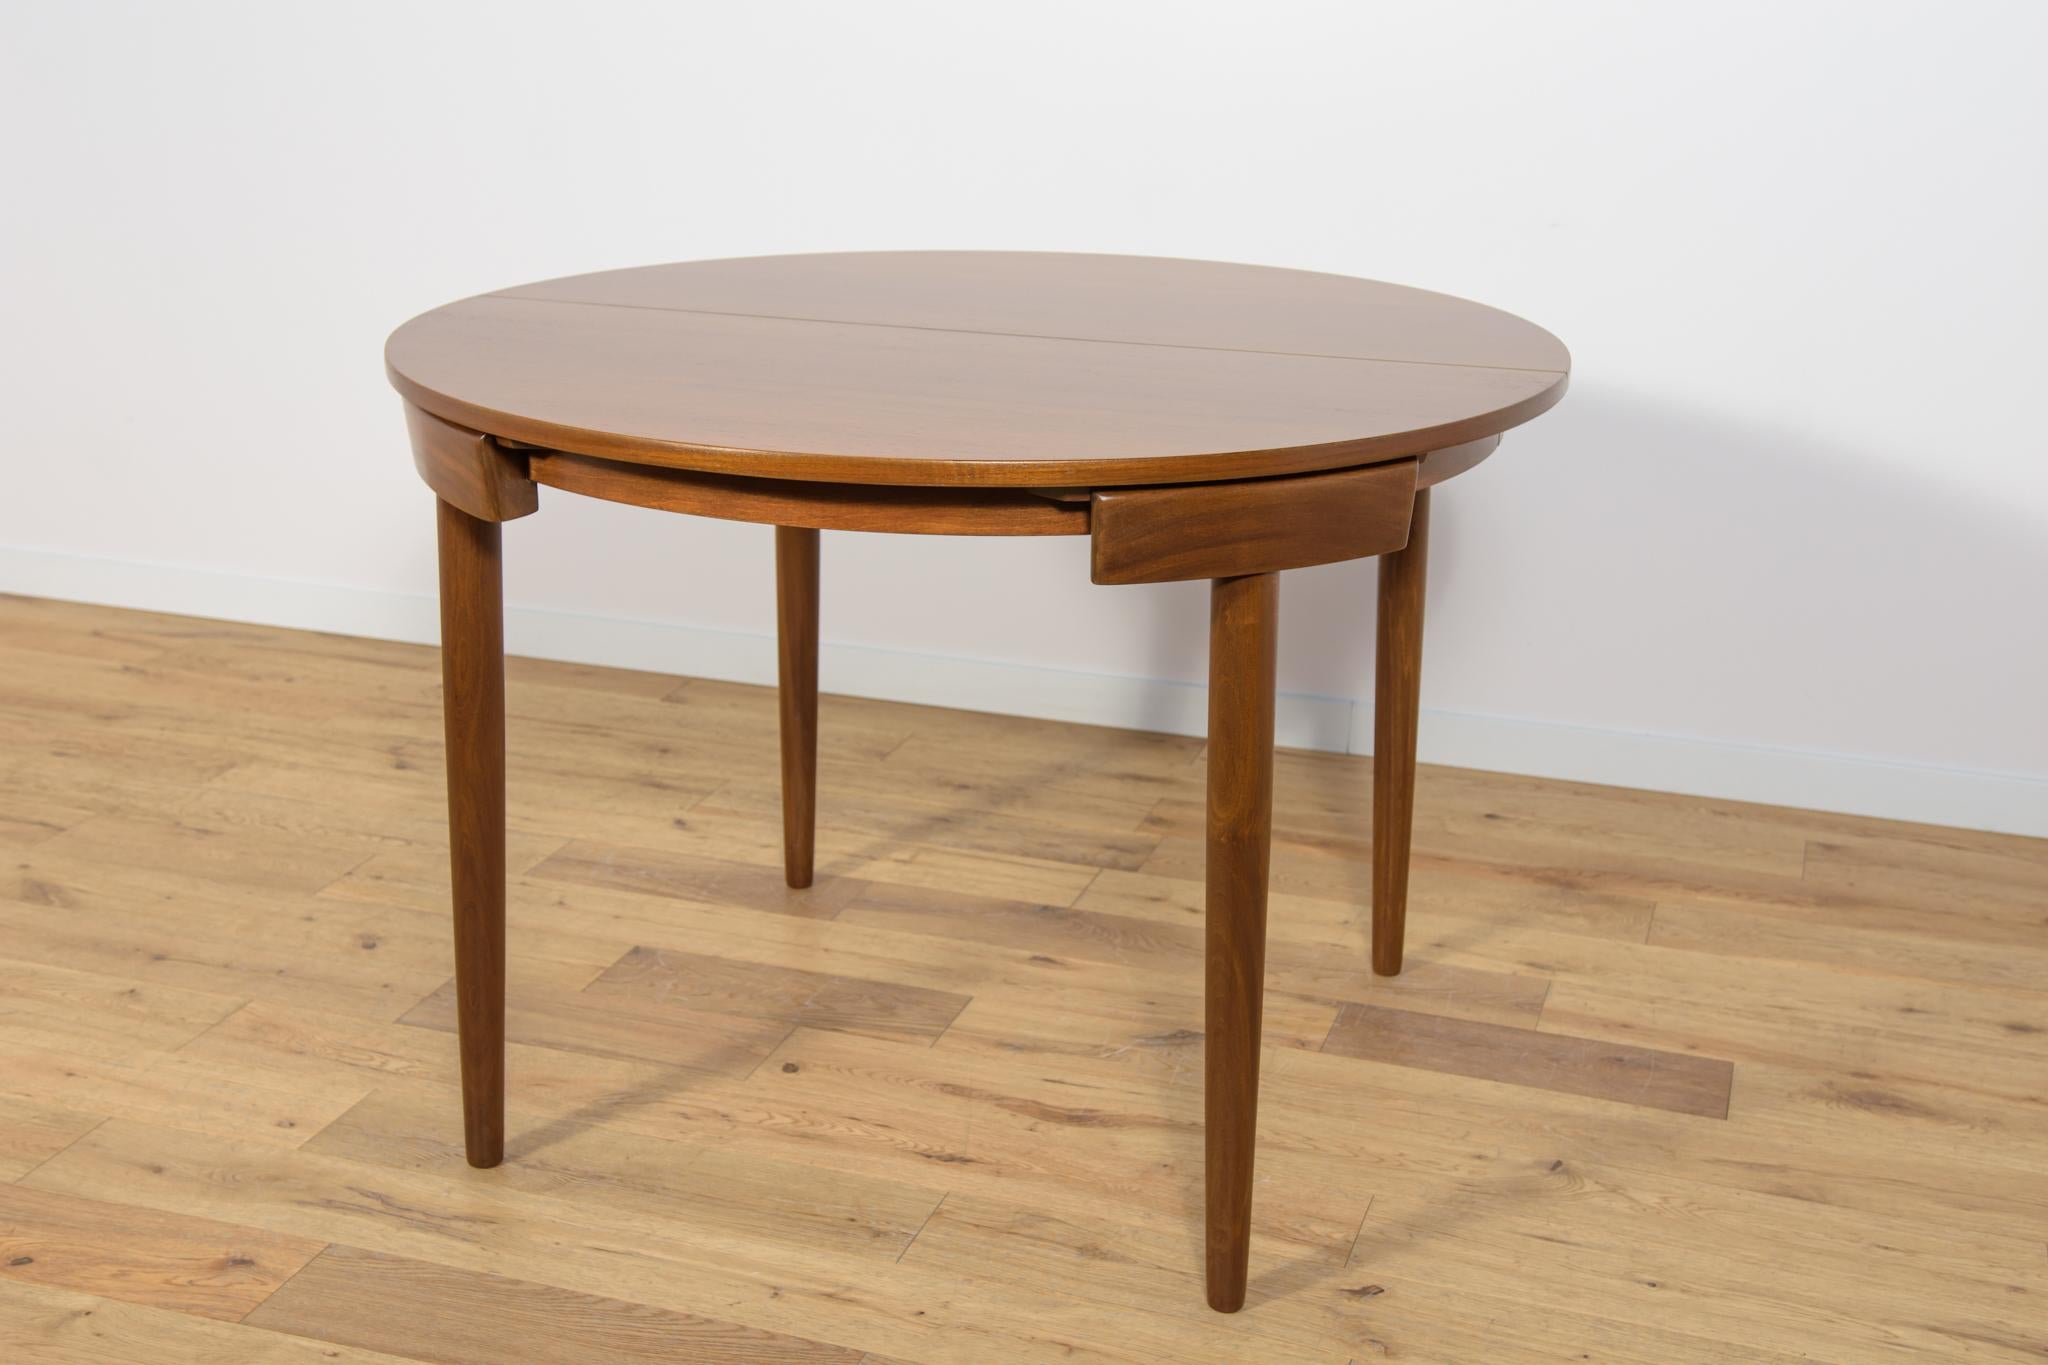  Mid-Century Teak Dining Table and Chairs Set by Hans Olsen for Frem Røjle. For Sale 5